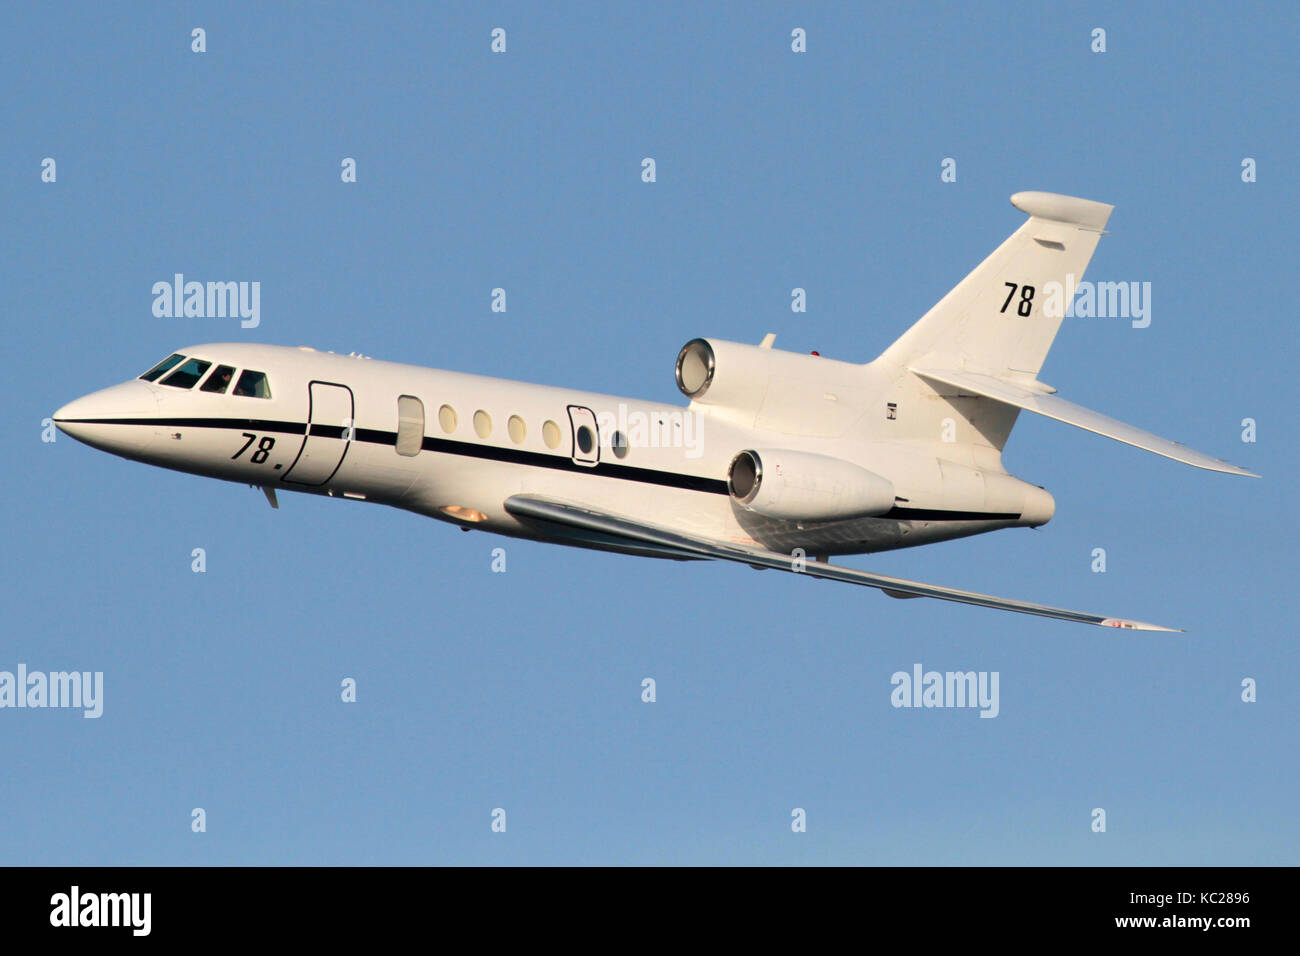 Dassault Falcon 50M maritime patrol jet plane of the French Navy in flight Stock Photo